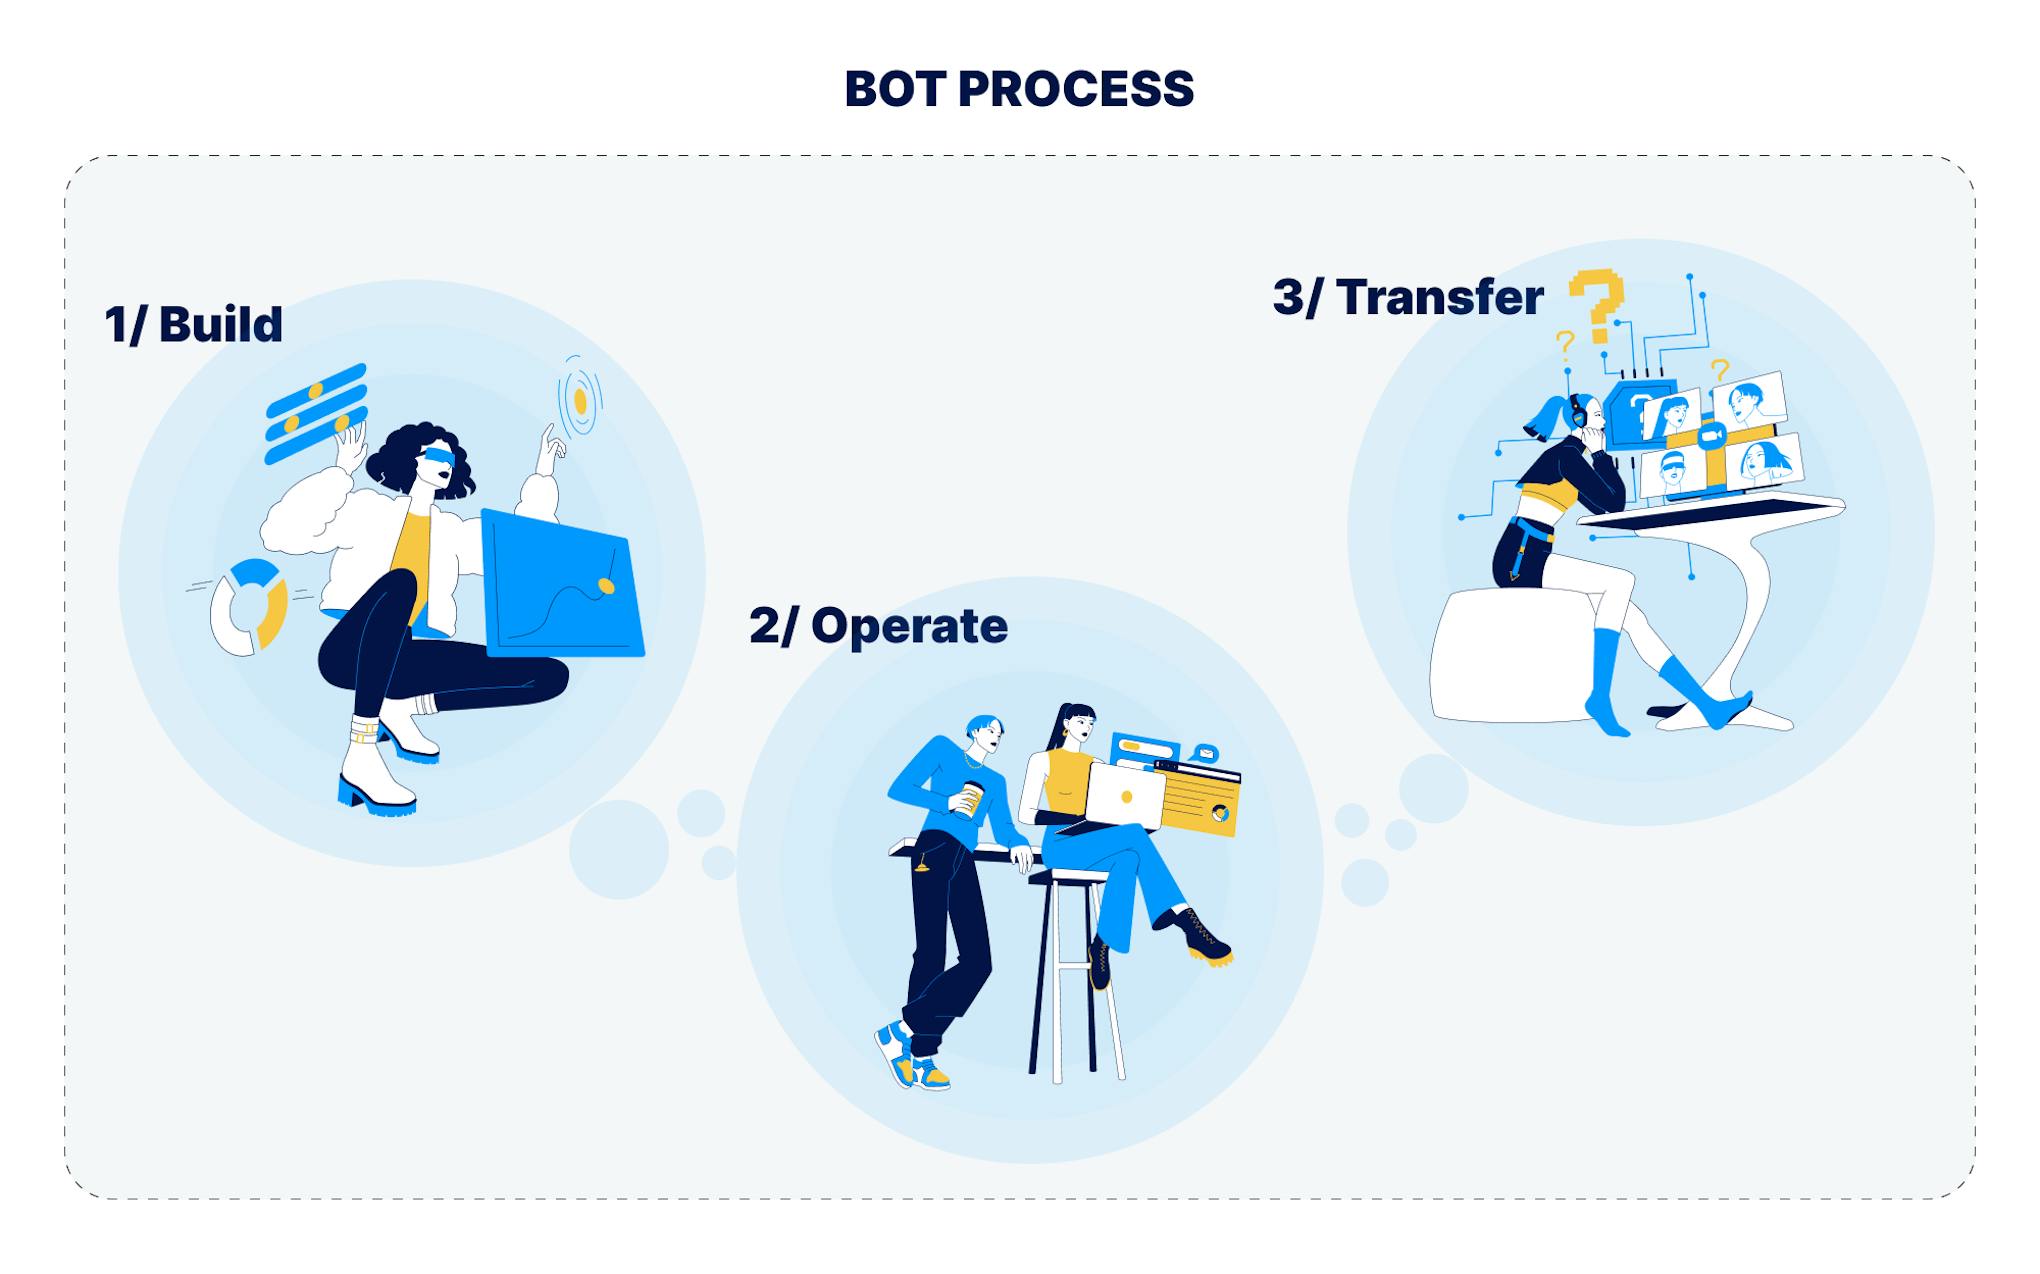 How do BOT contracts work?